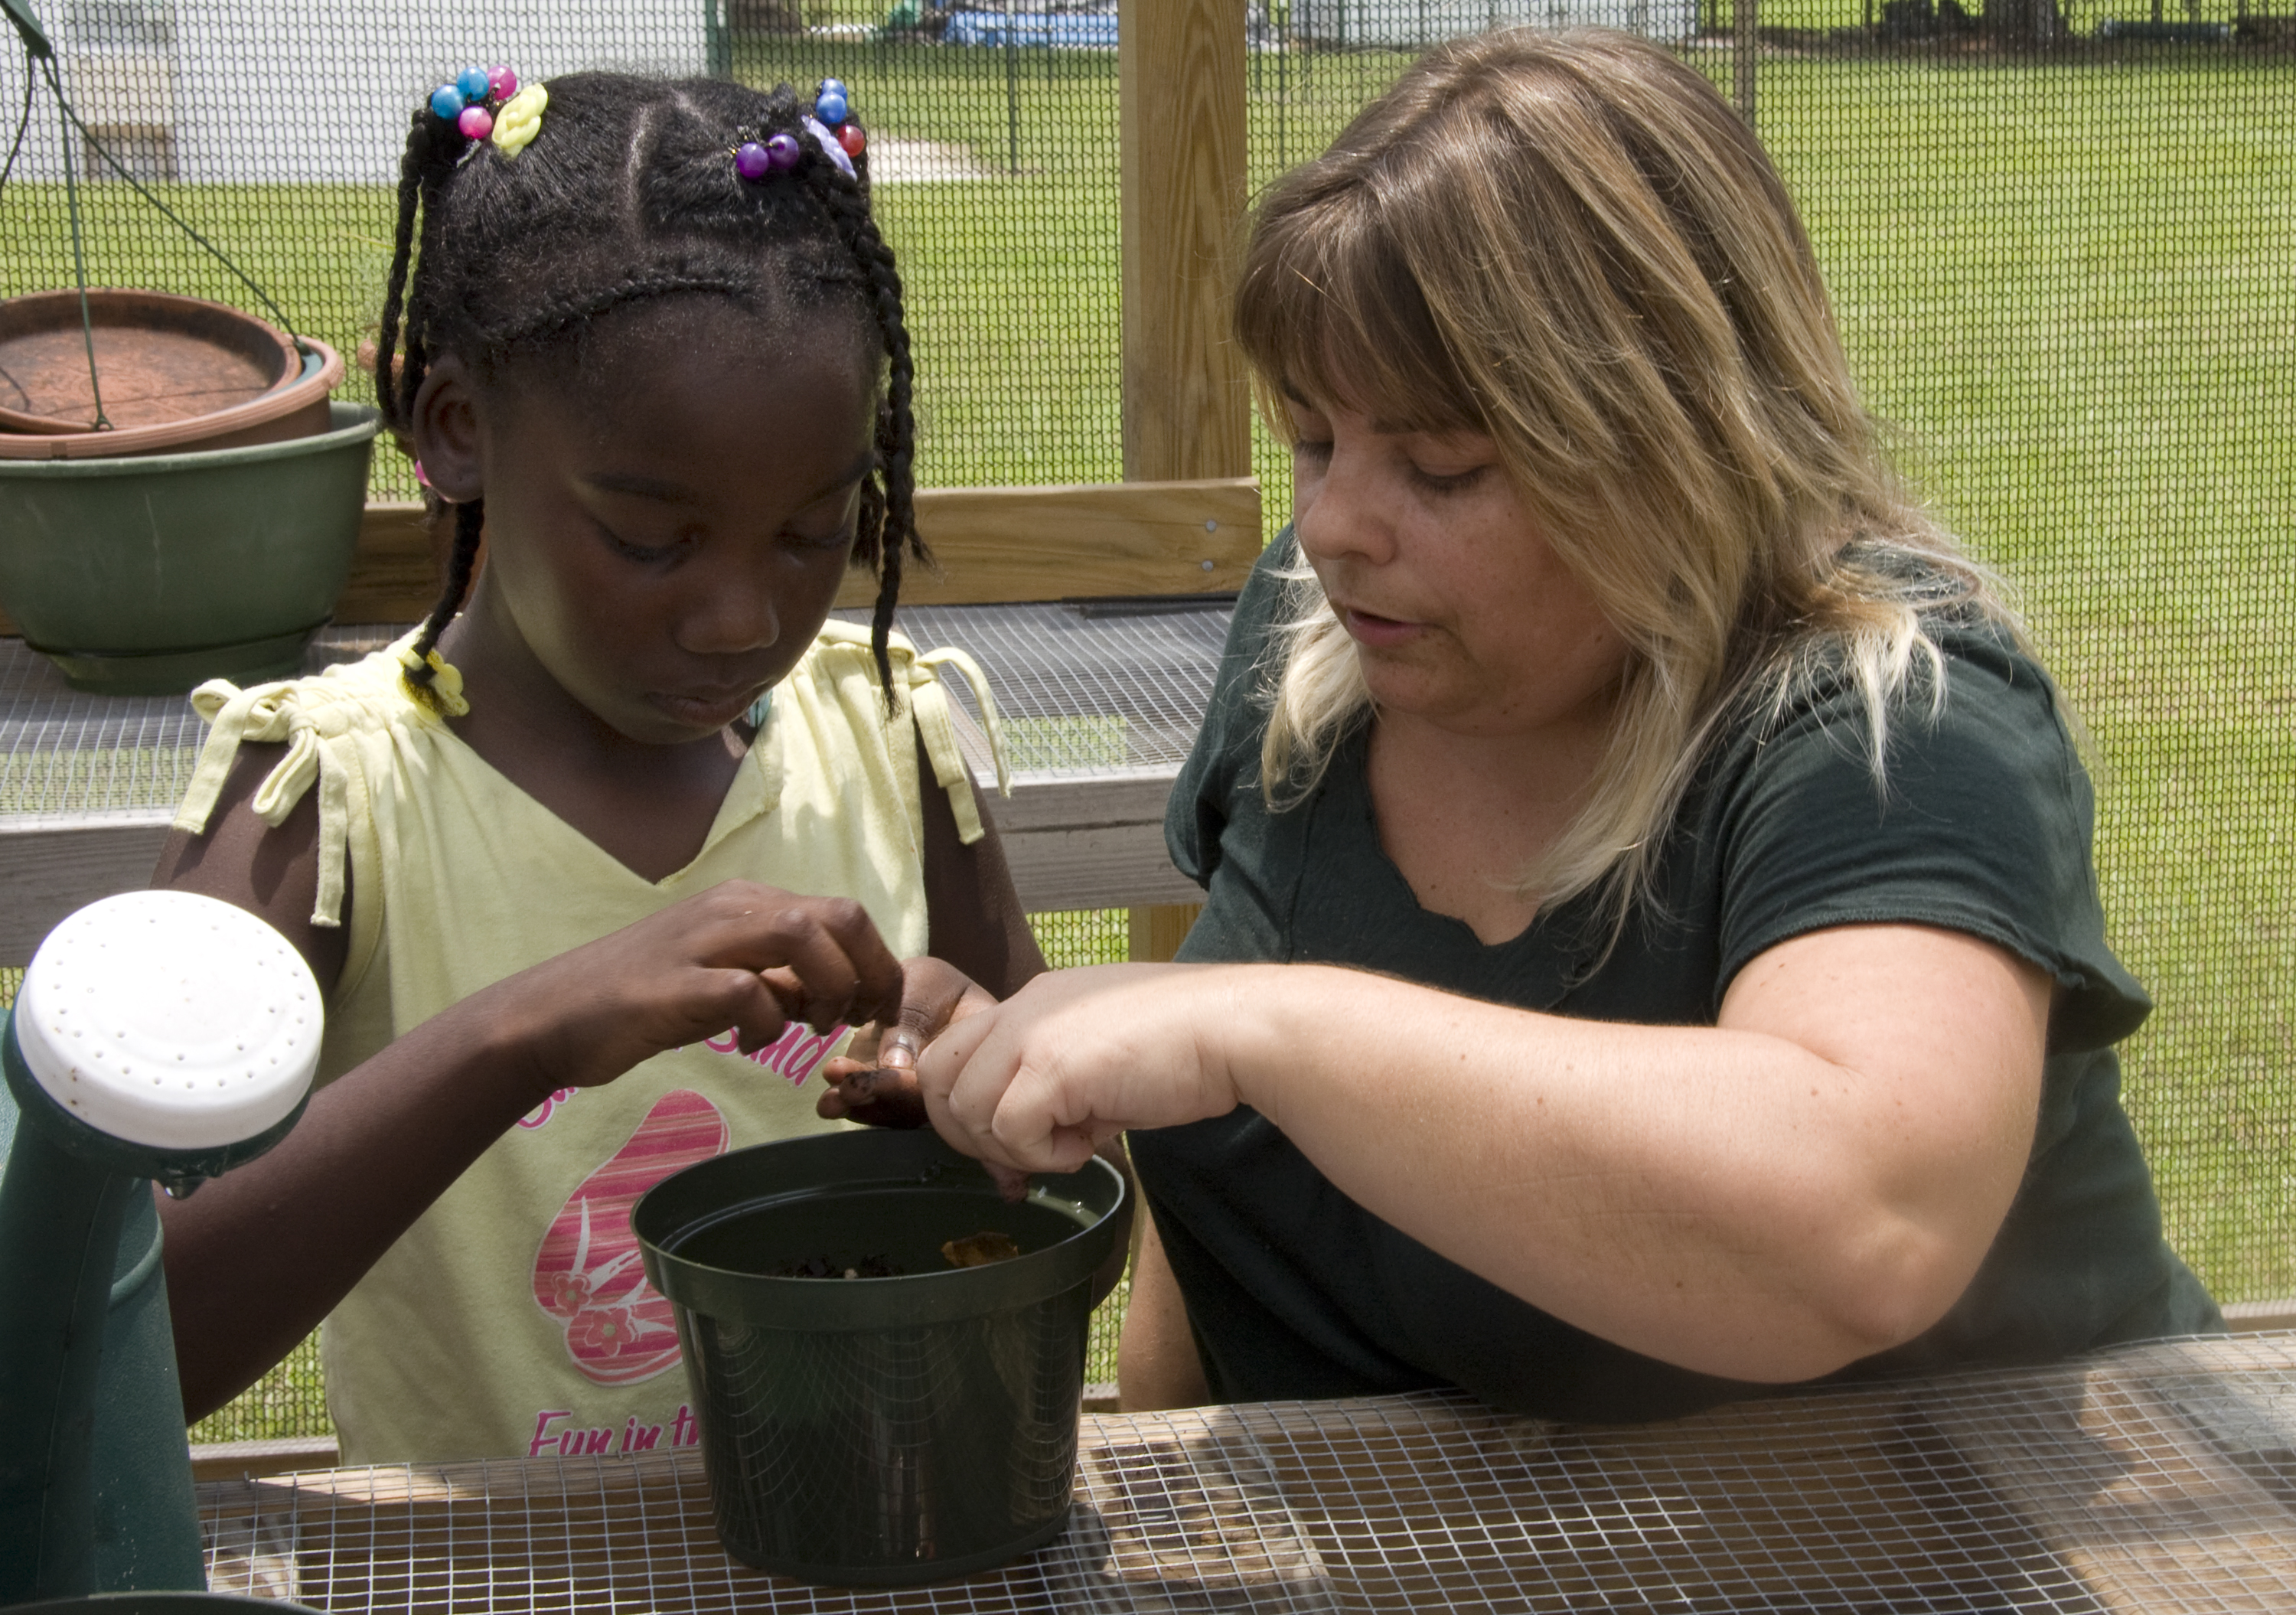 Adult showing youth how to pot plants